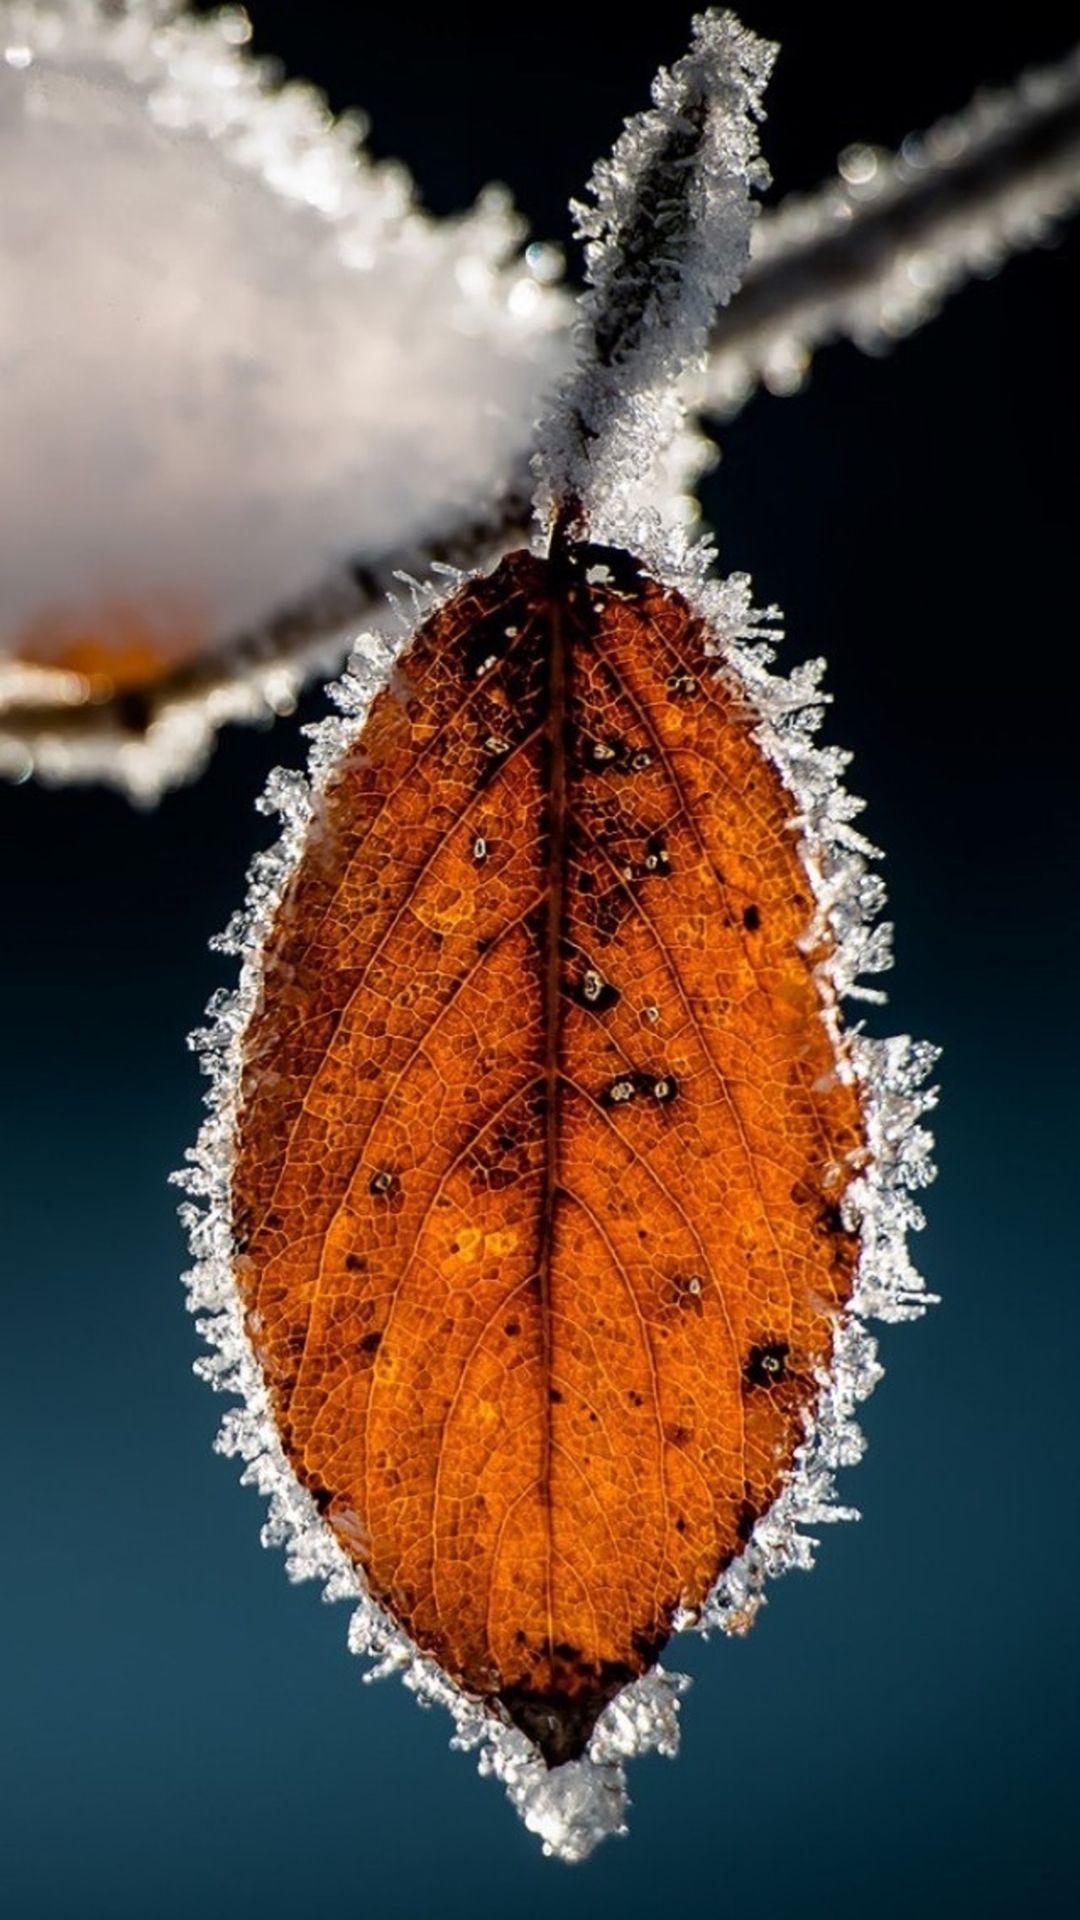 Winter Icy Orange Leaf Macro IPhone 6 Wallpaper Download. IPhone Wallpaper, IPad Wallpaper One Stop Download. Leaf Photography, Winter Nature, Snow Photography